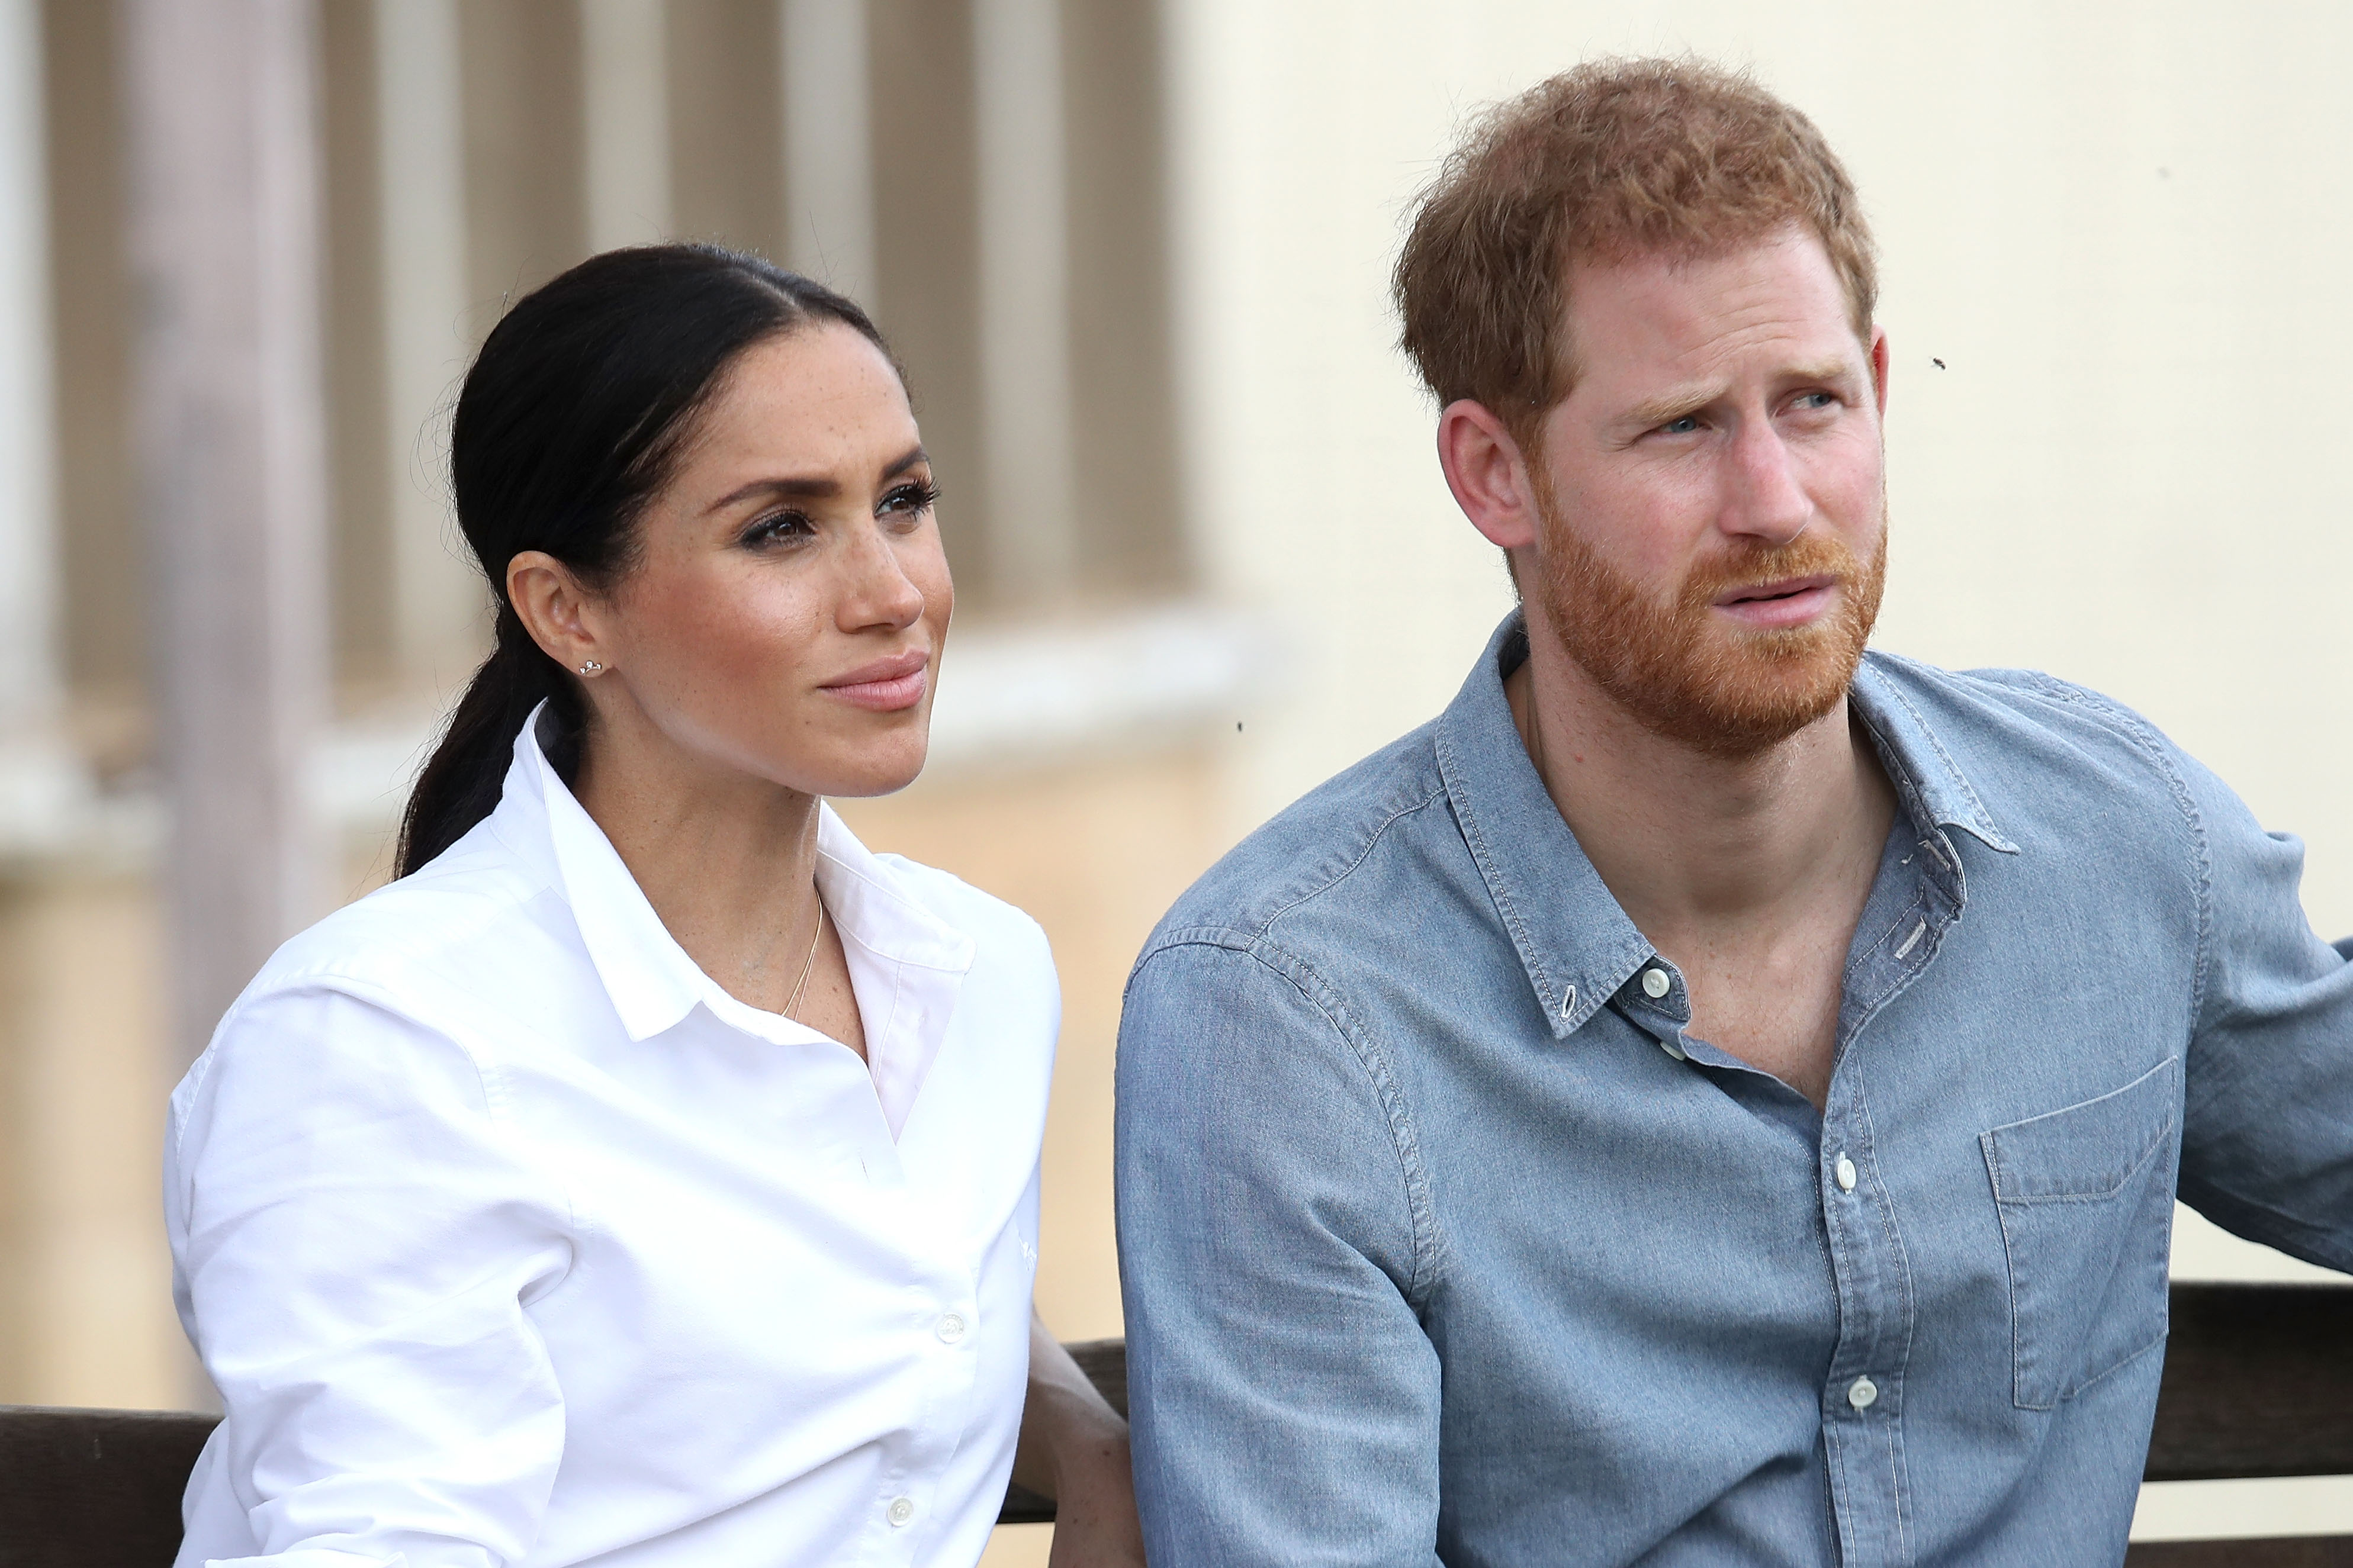 Photo of Prince Harry and Meghan Markle during their visit to Australia in 2018